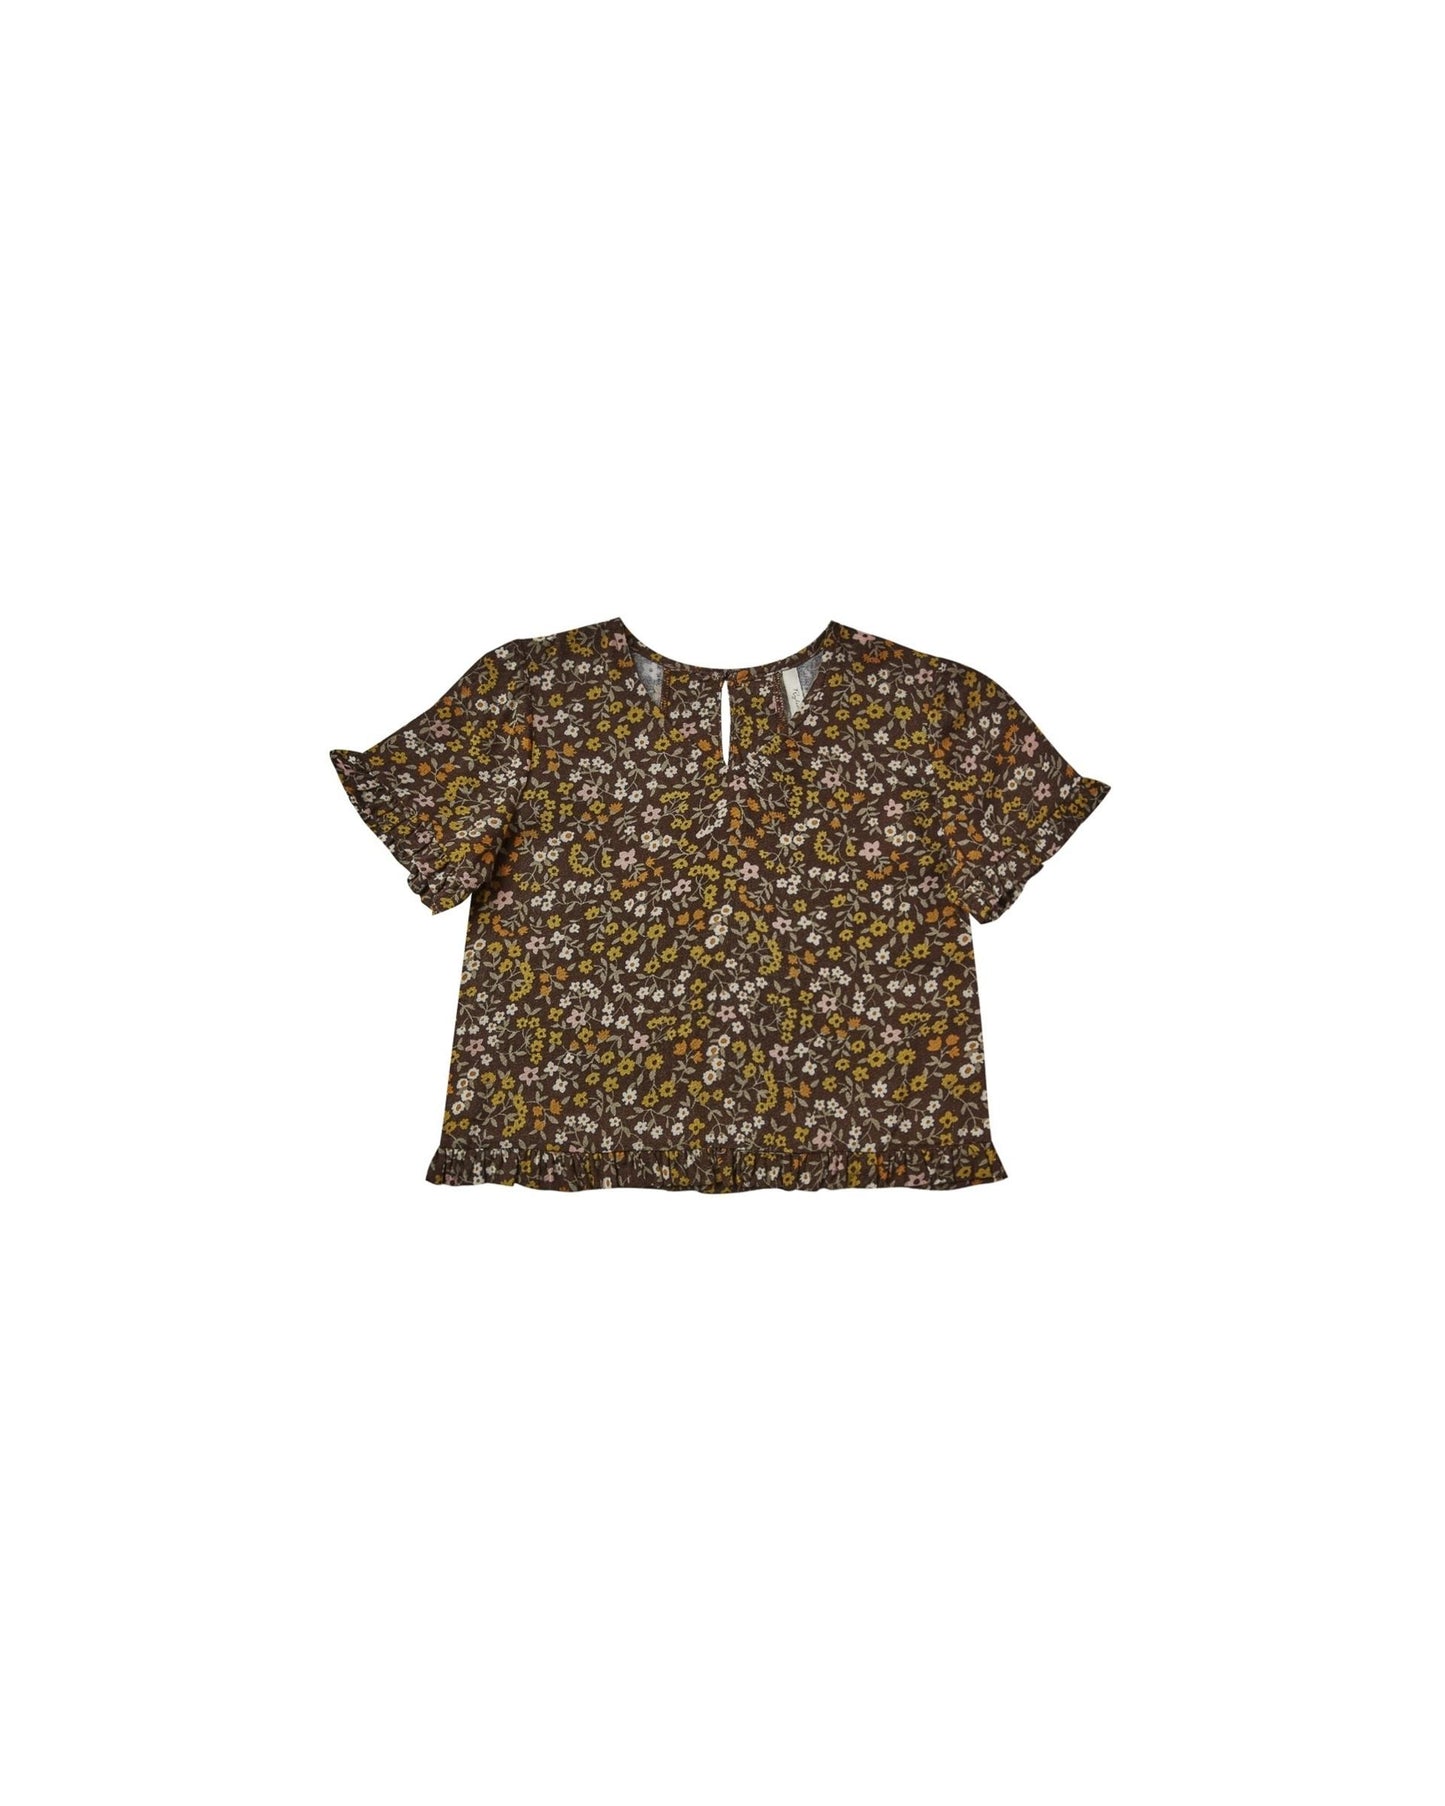 DARK FLORAL RORY TOP